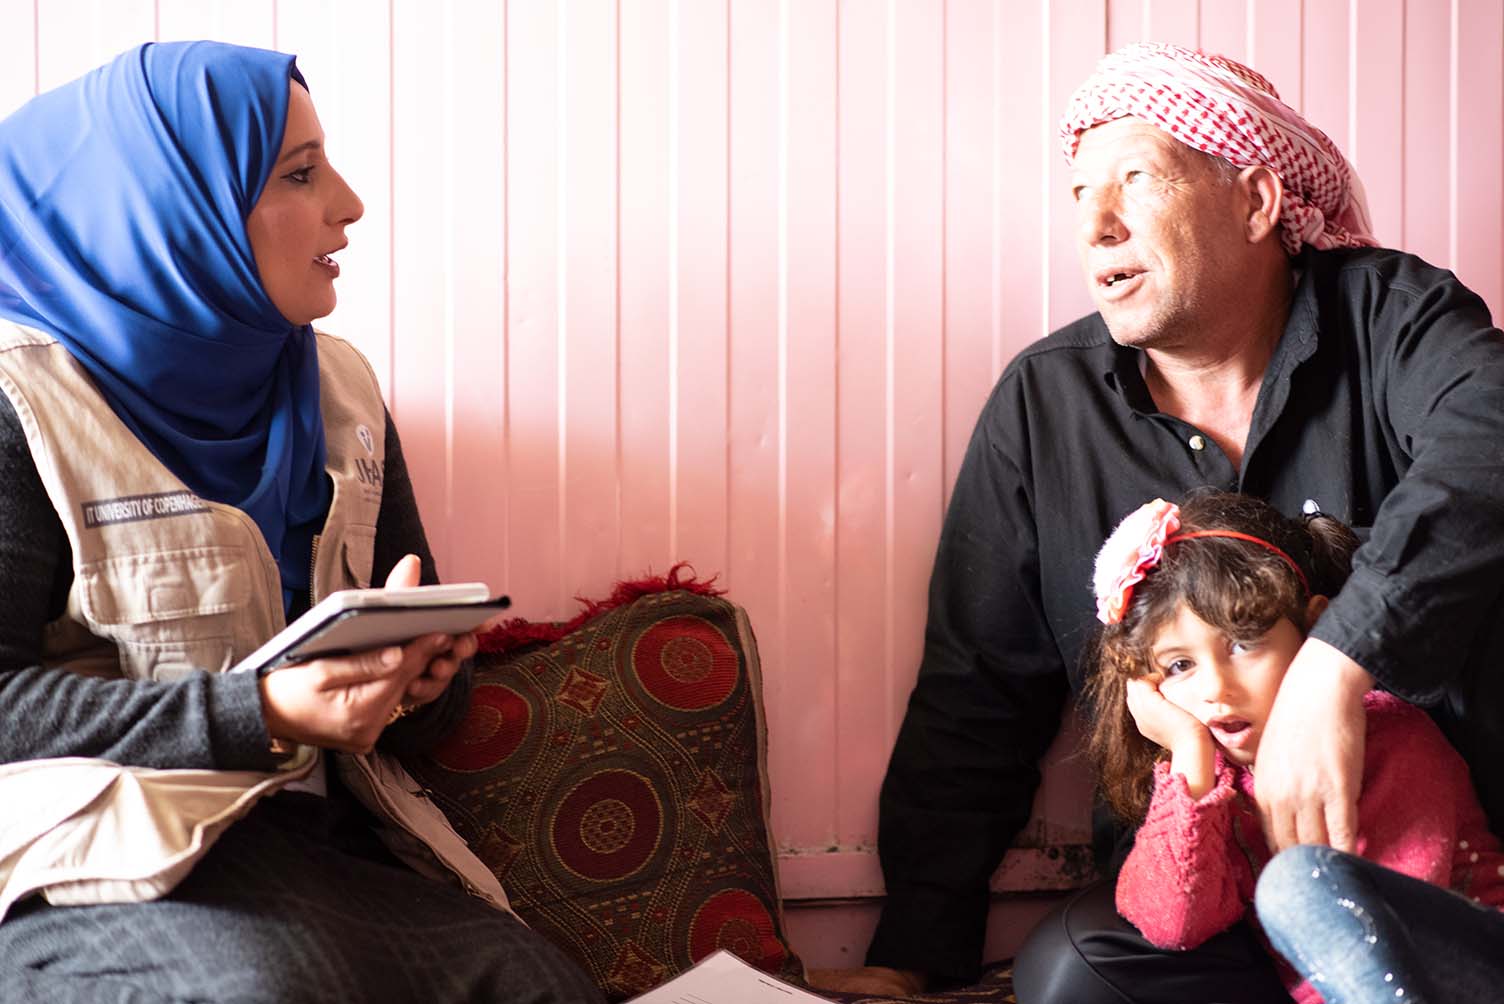 Mental health screening in the home of a refugee